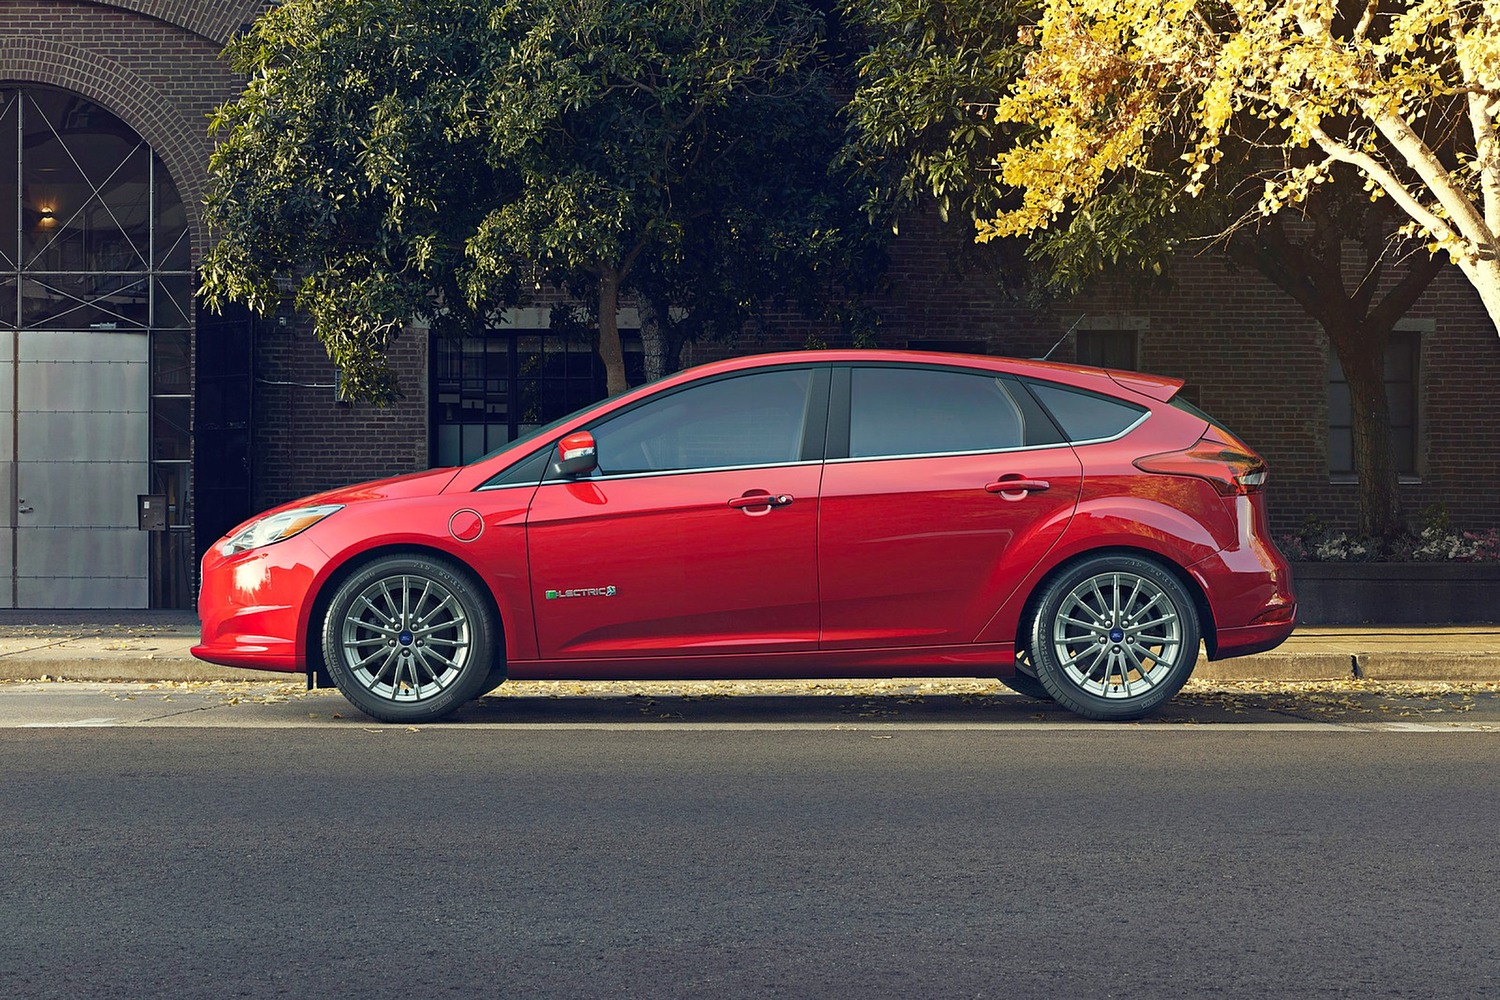 Ford Focus Electric 4dr Hatchback Profile (2017 model year shown)